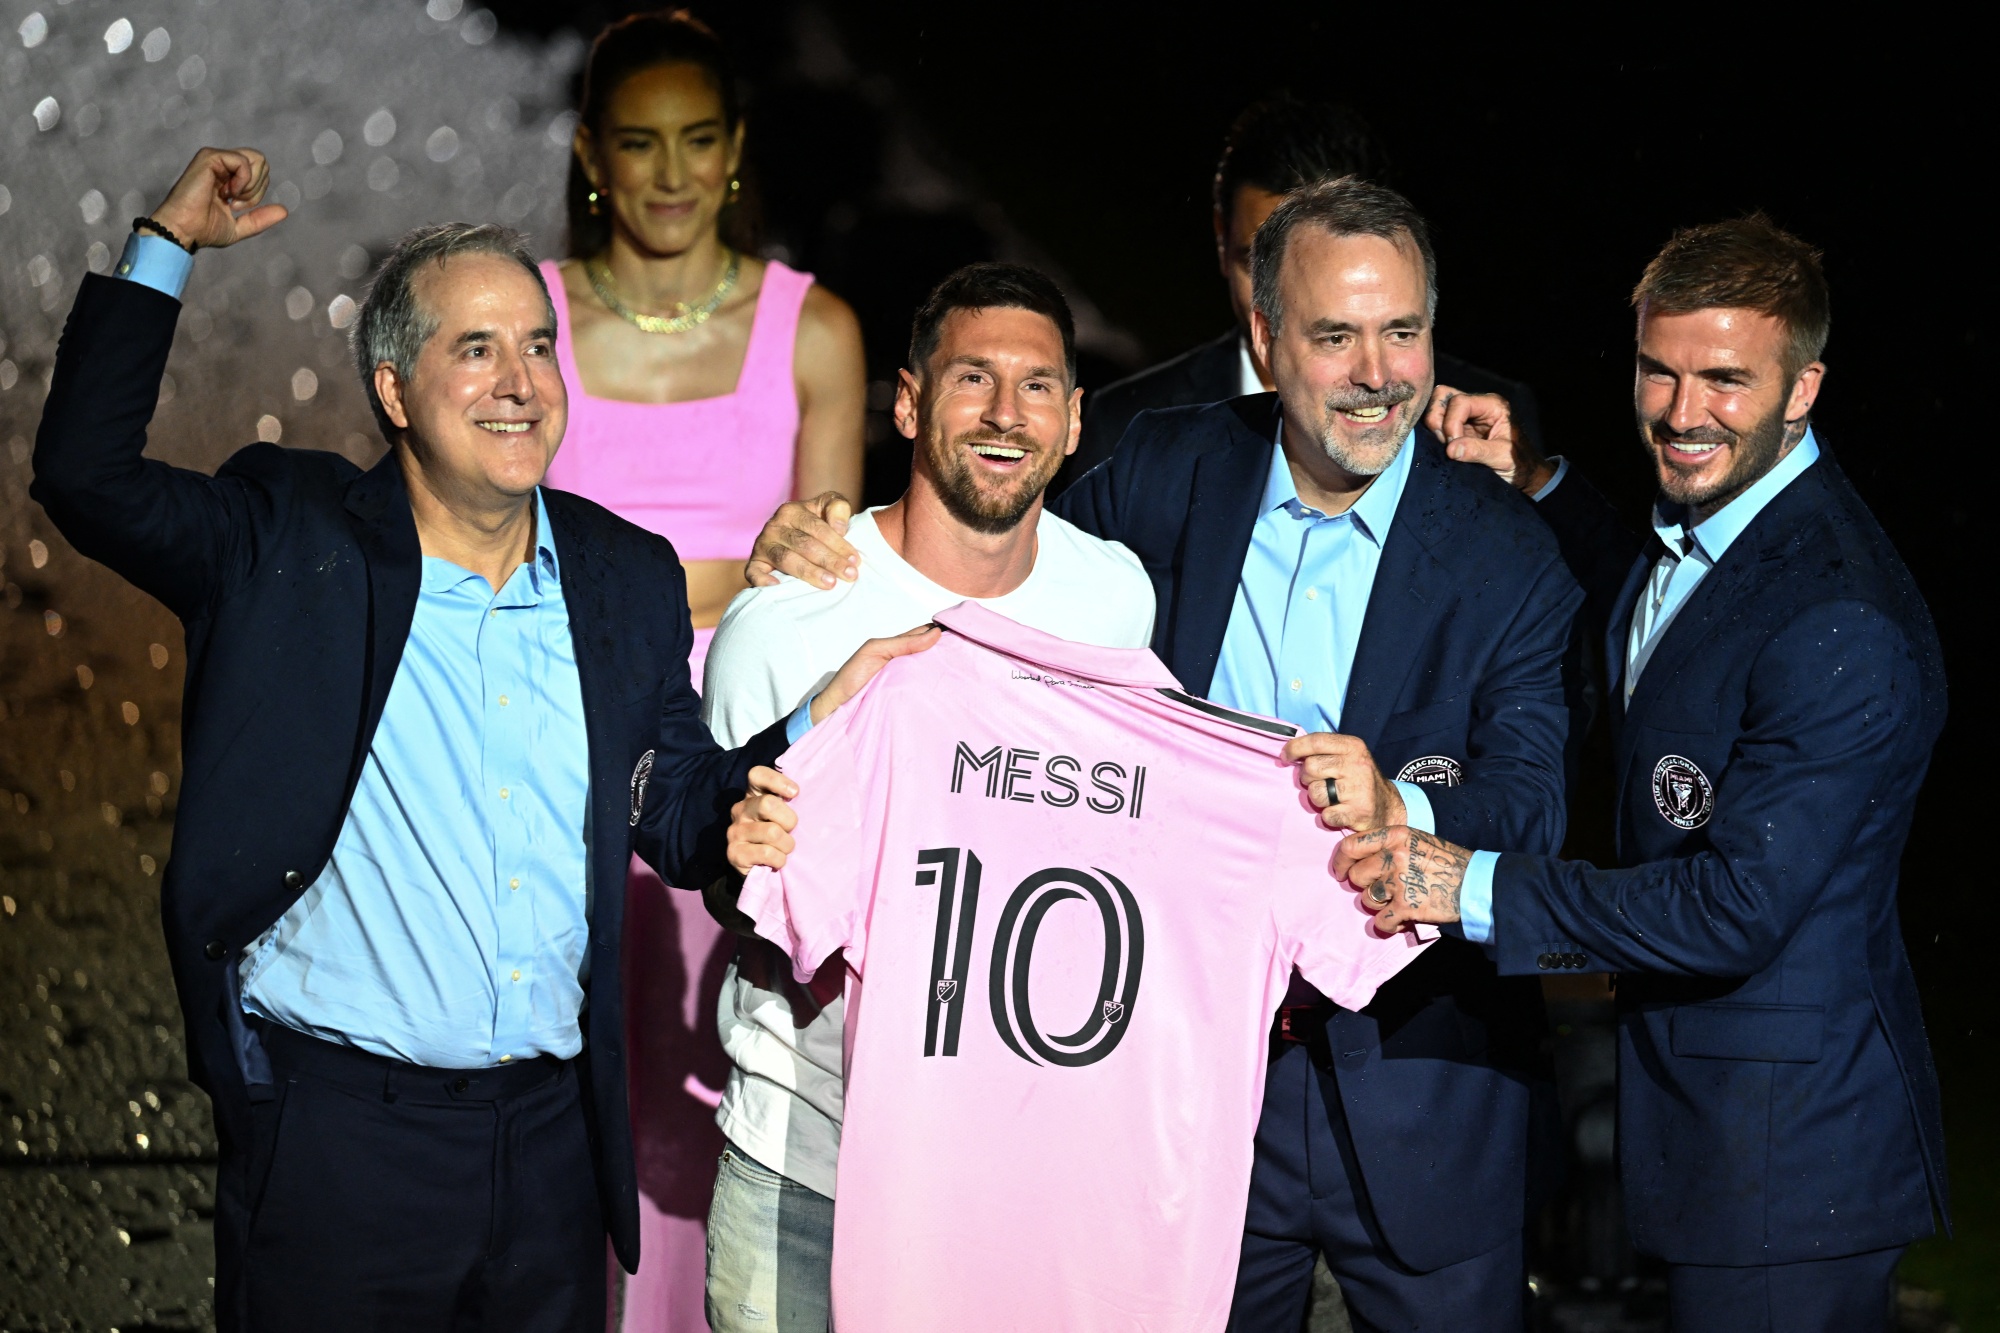 Messi's shirt is the hottest commodity in Miami but he didn't even wear  it at his presentation ceremony